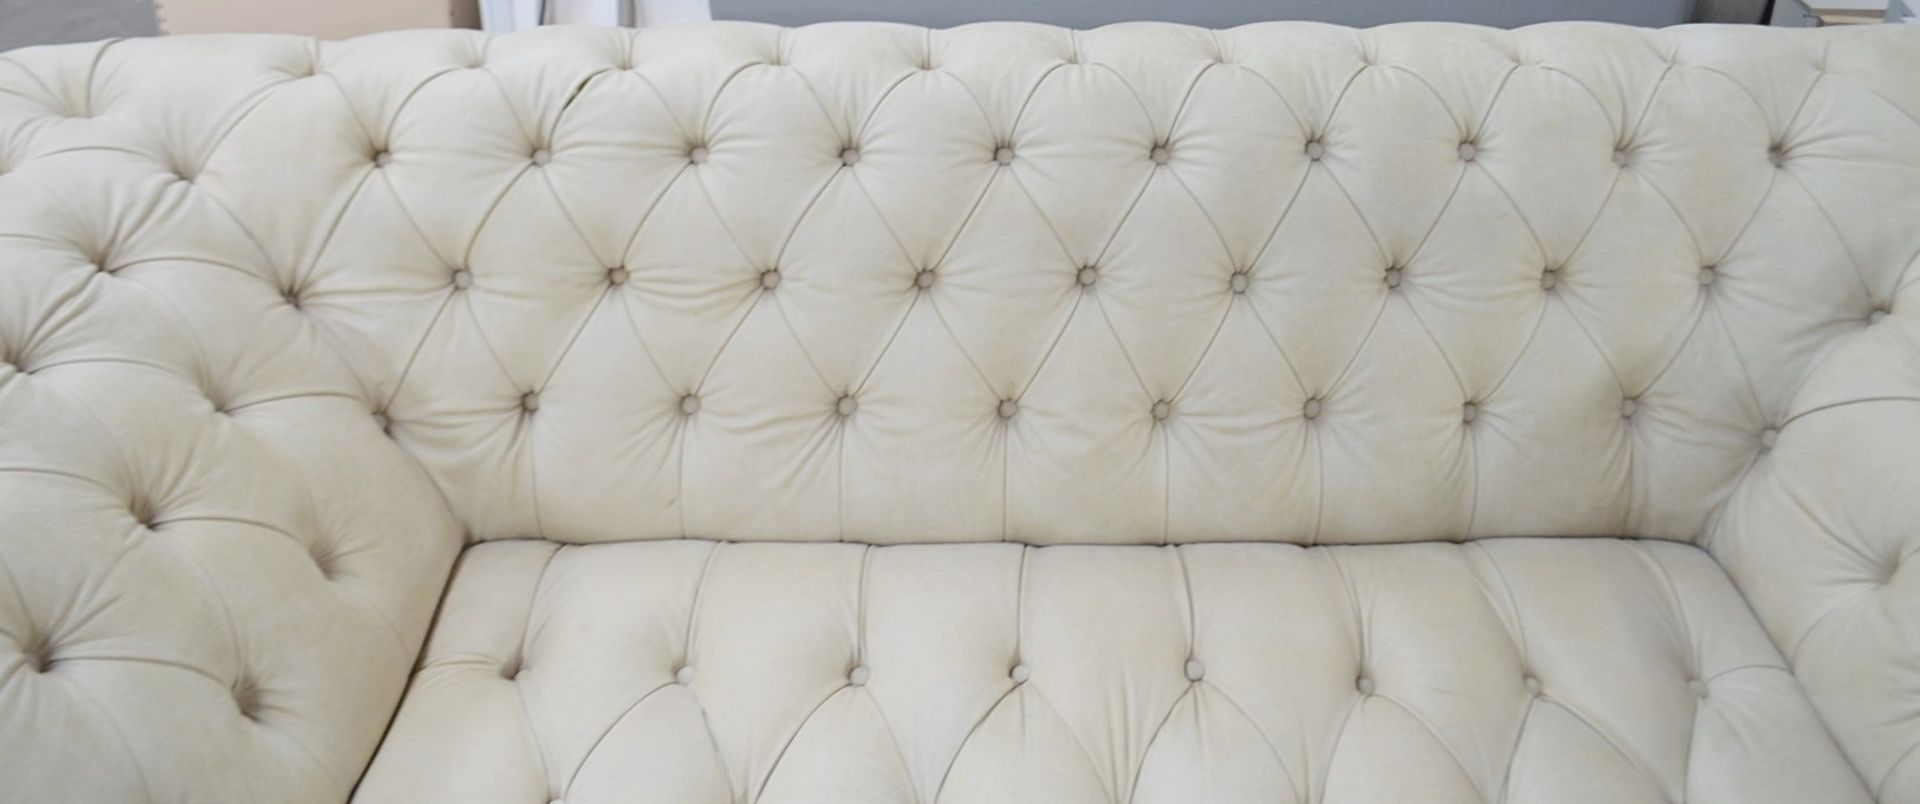 1 x Stunning Bespoke Cream Button-Back Leather Sofa - Professionally Handcrafted - Complete One-Off - Image 2 of 8